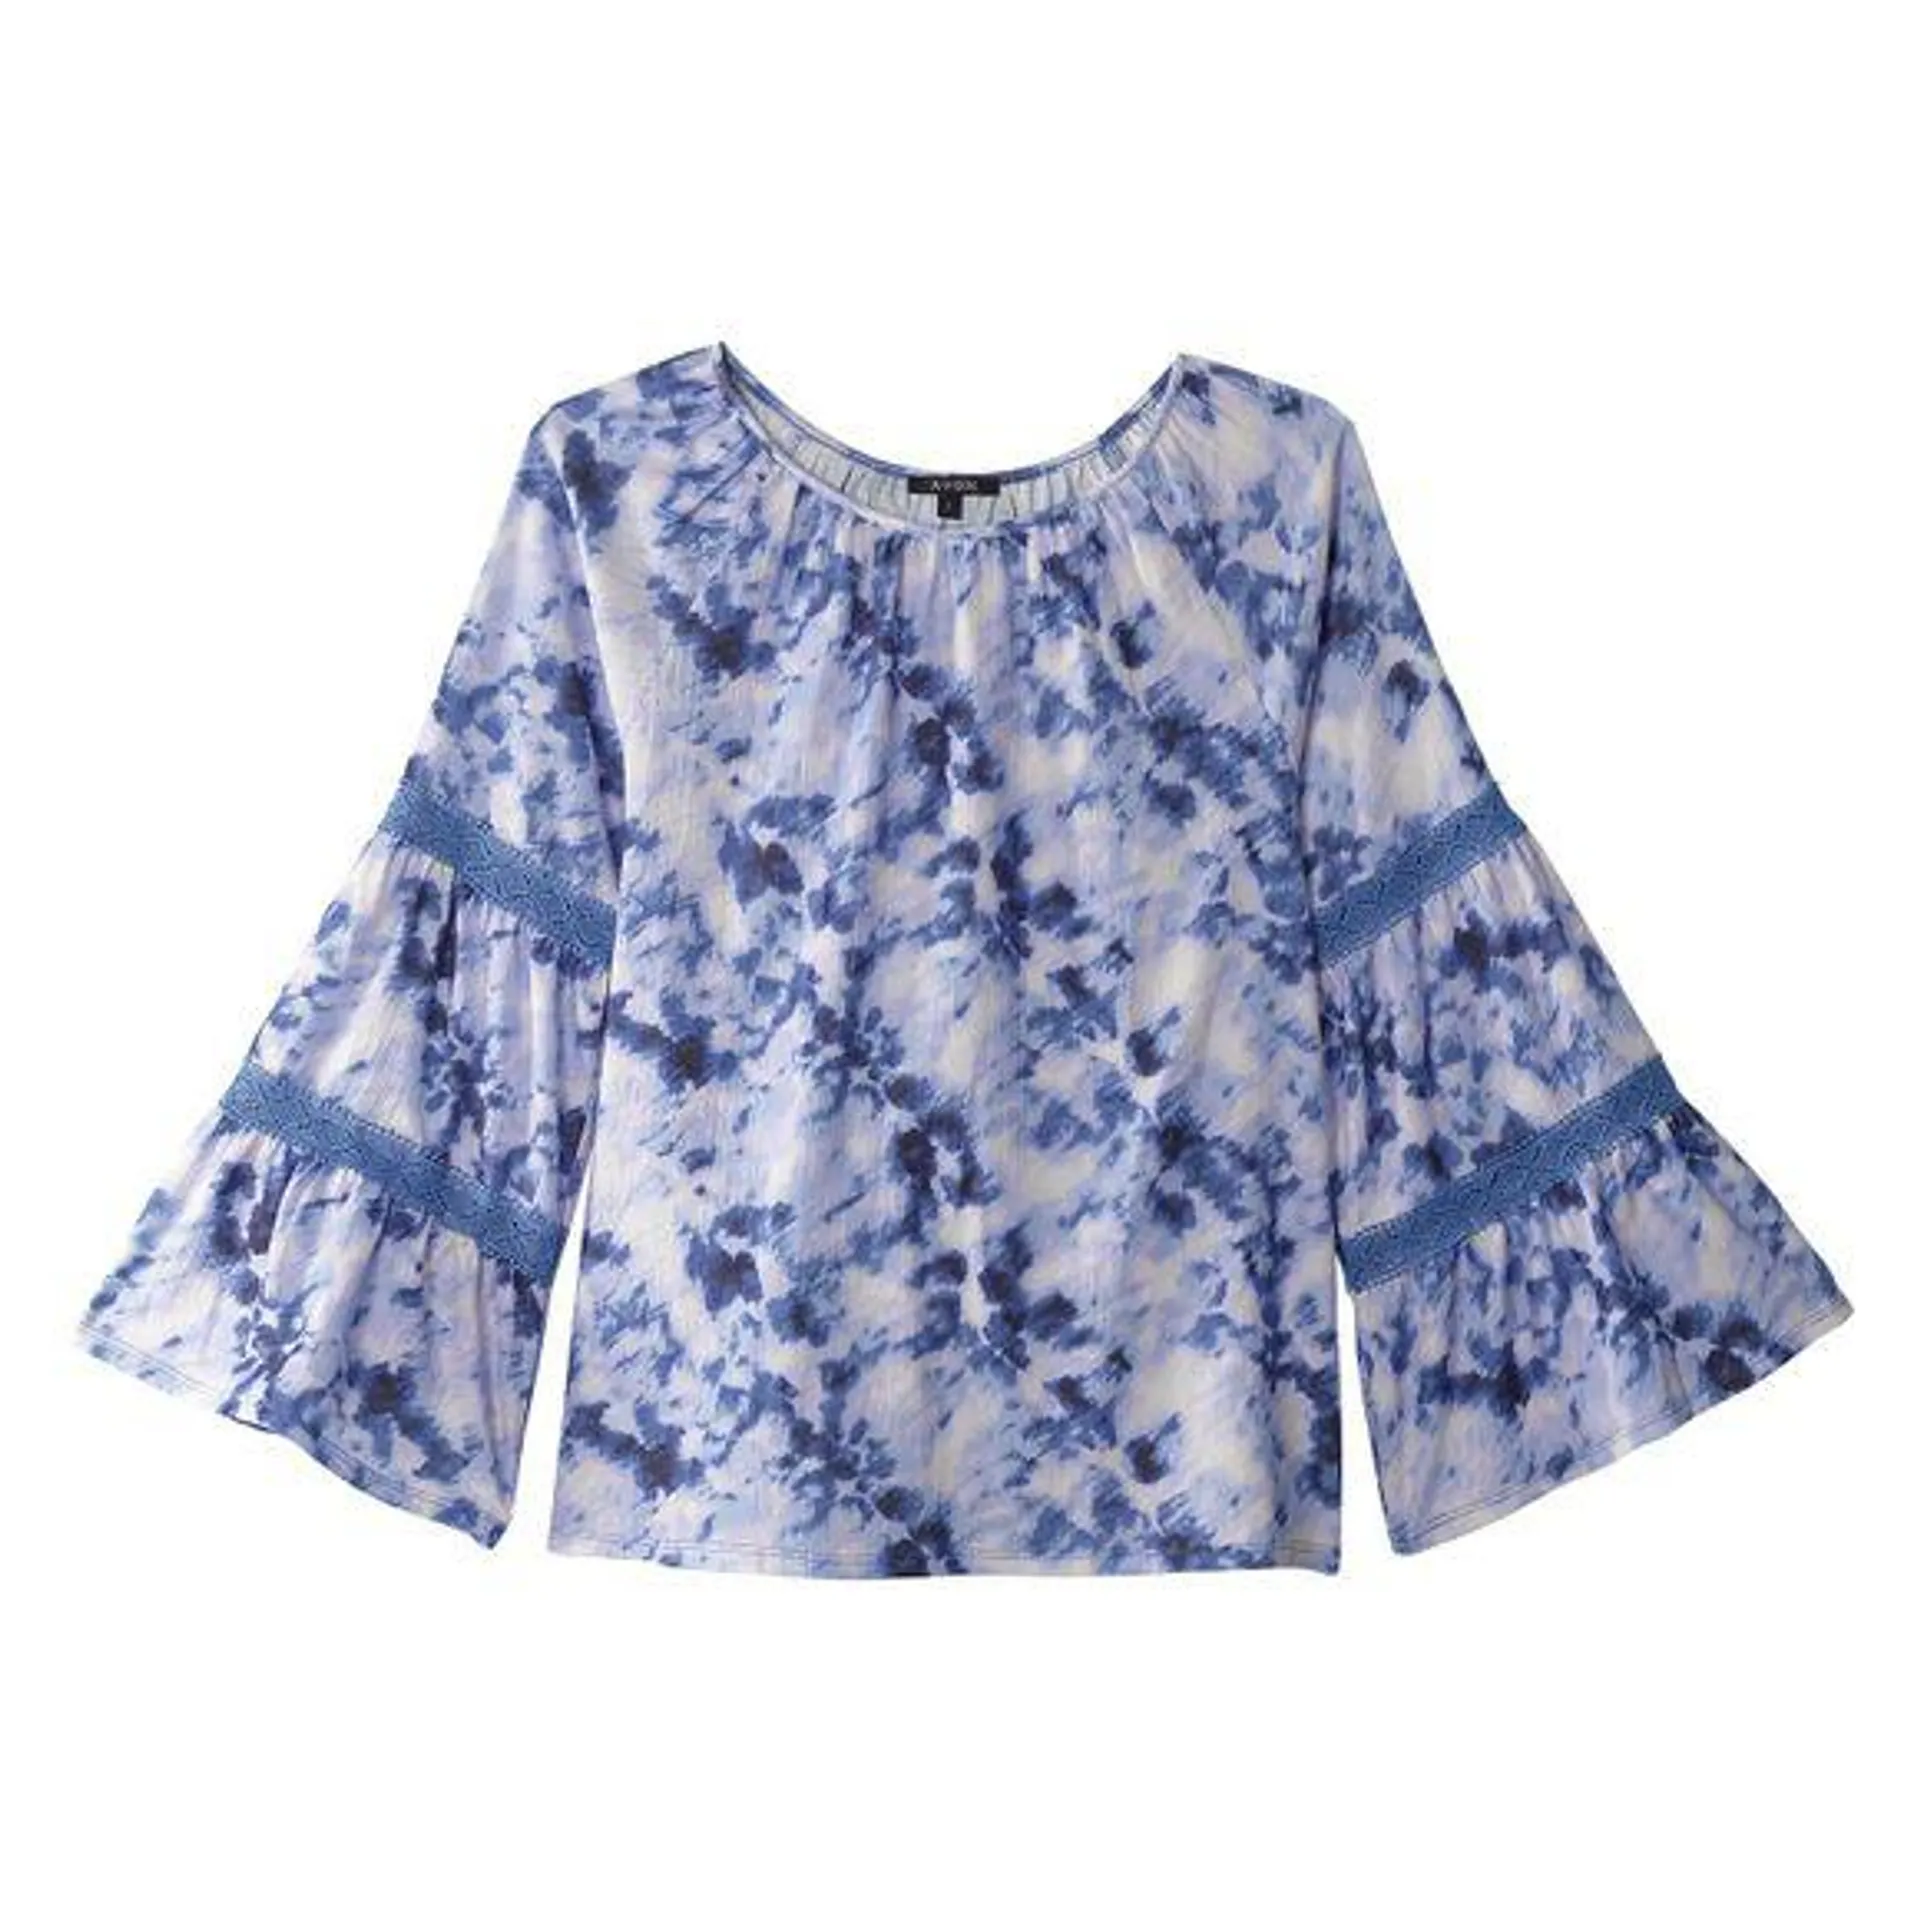 Printed Bell Sleeve Top - Size L (12-14)